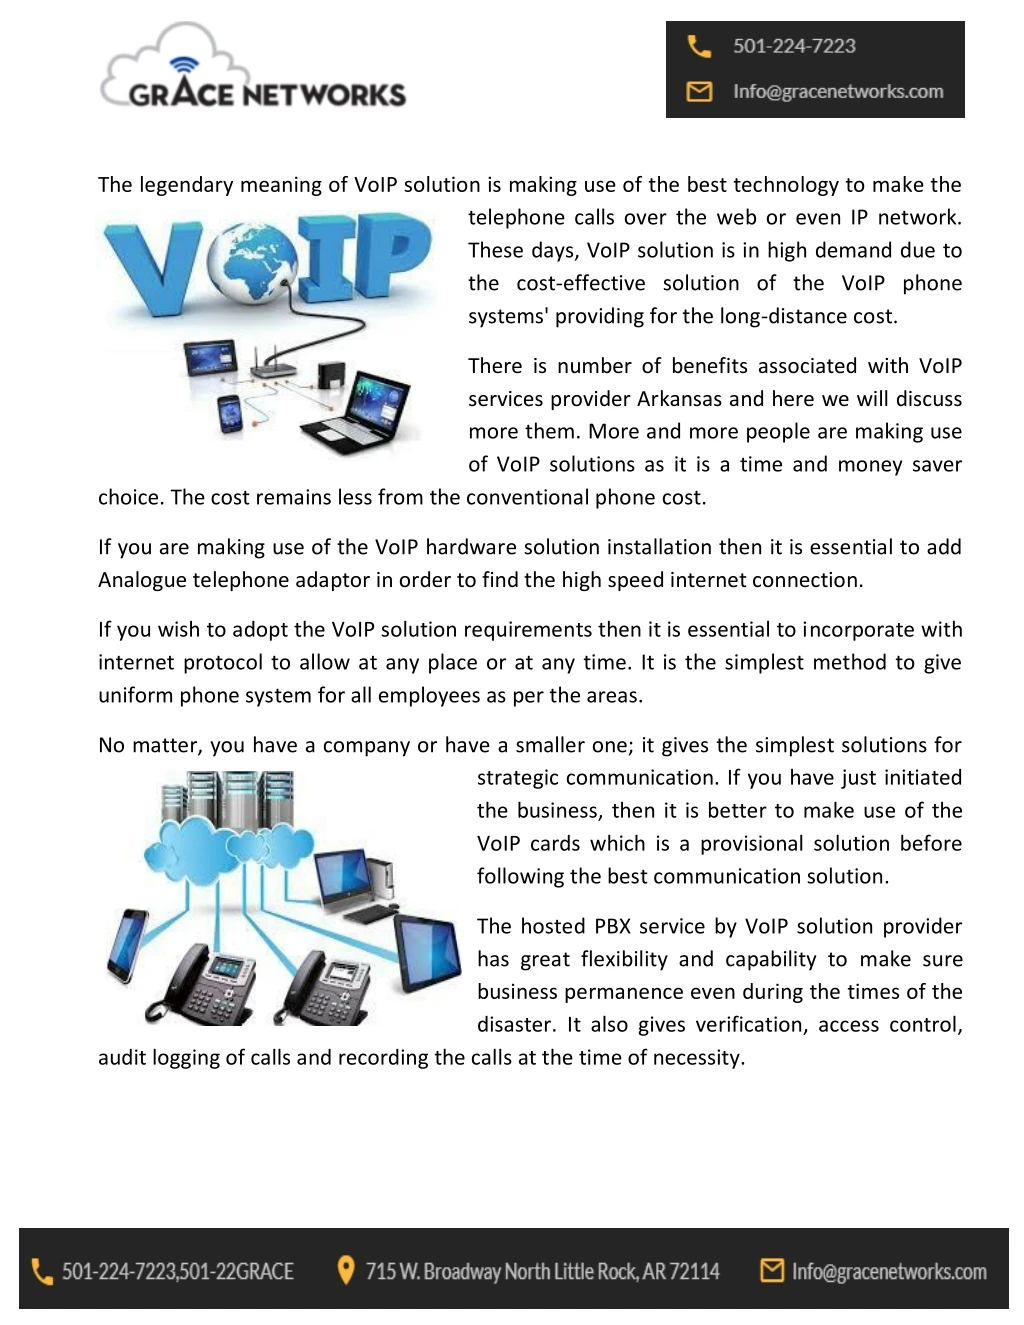 the legendary meaning of voip solution is making